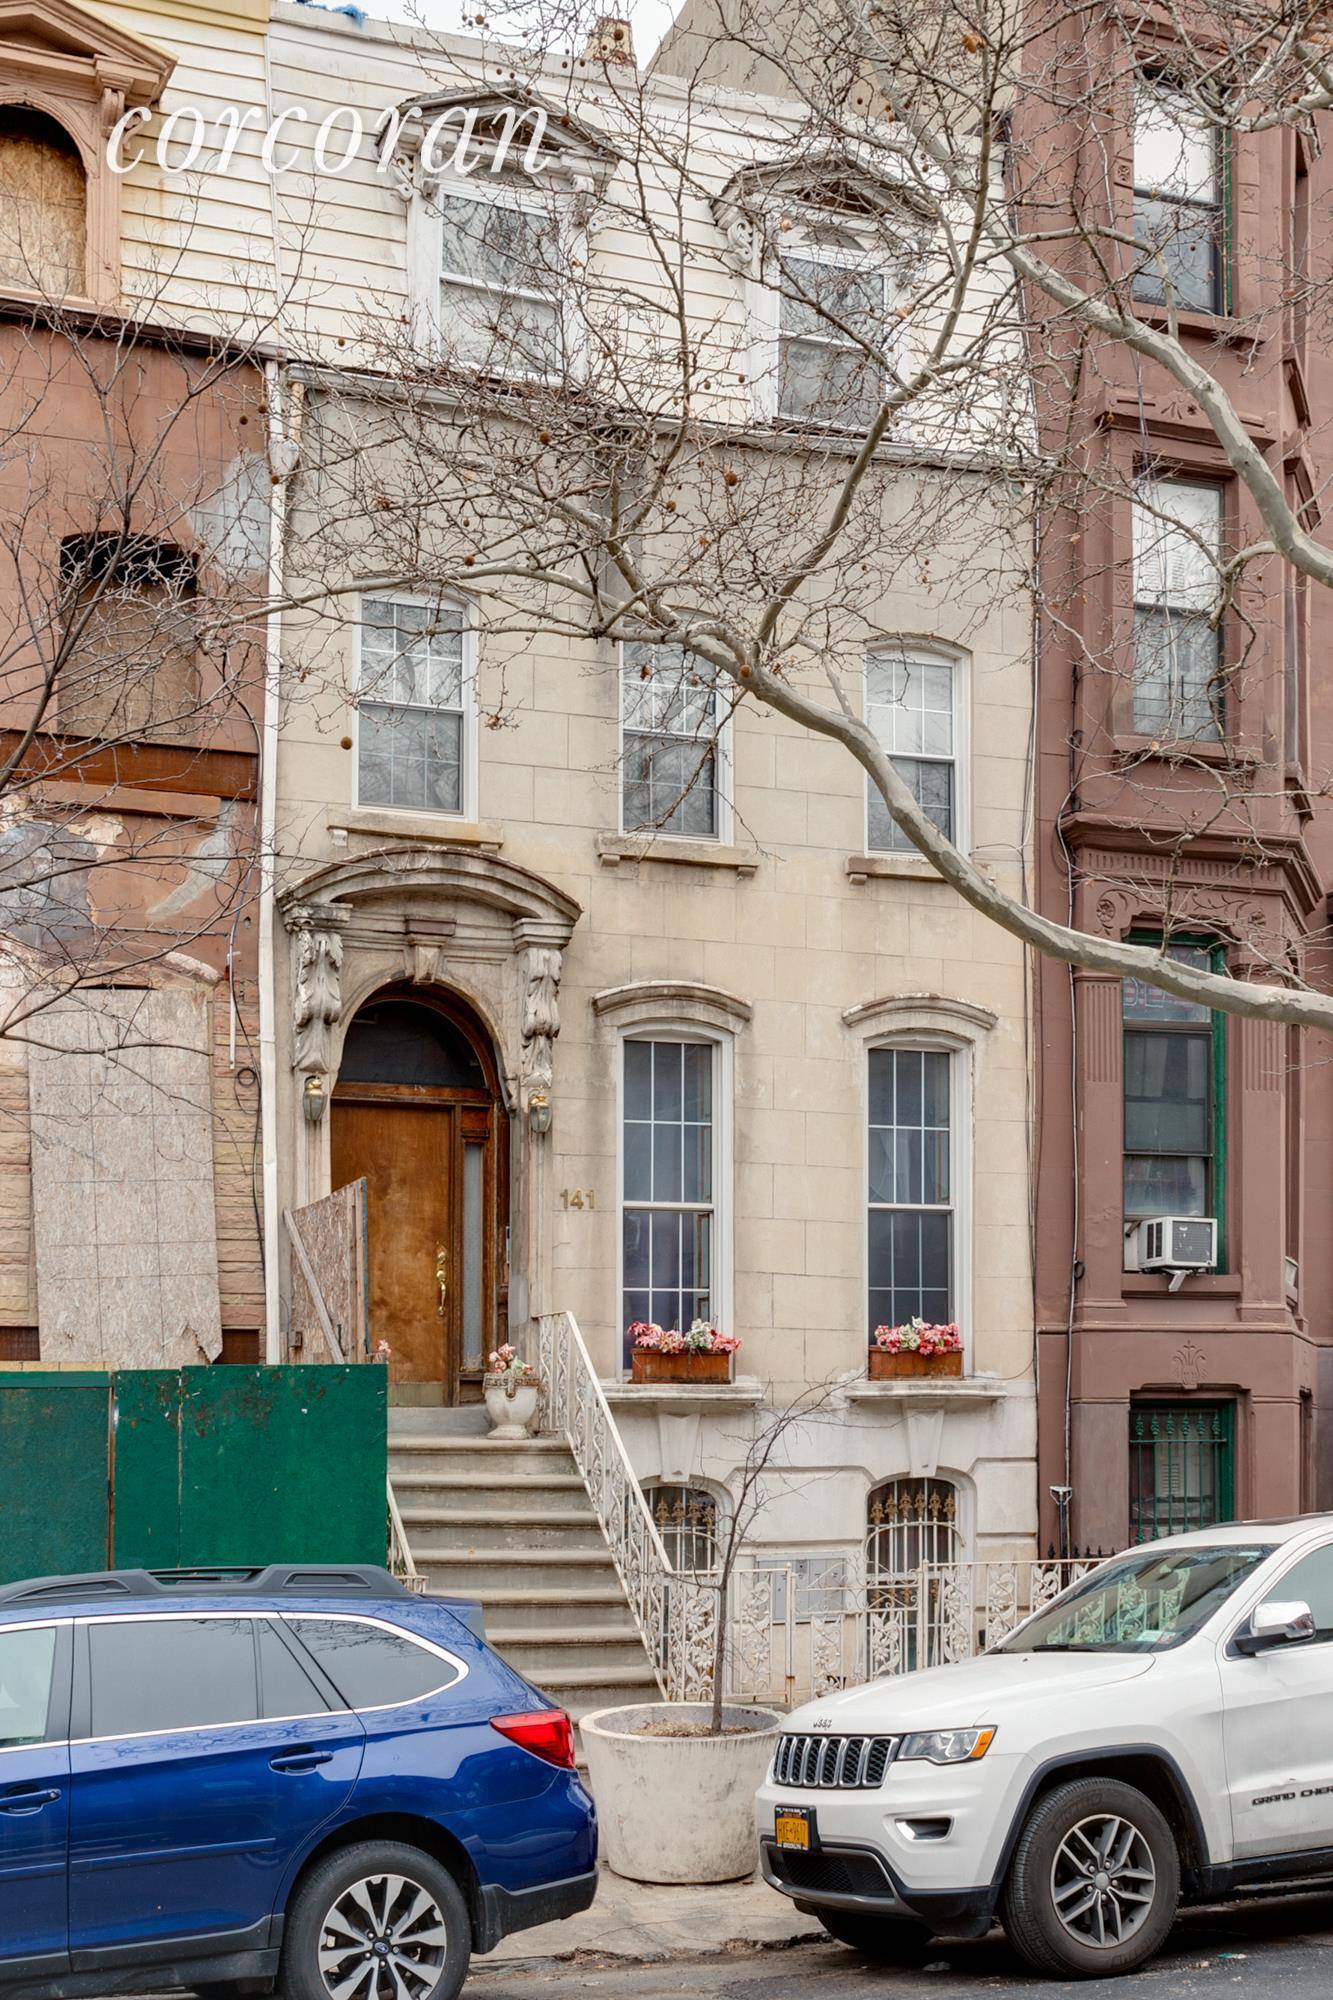 141 Lefferts placeLegal 4 family townhouse is located on Lefferts Place in Prime Bedford Stuyvesant, bordering Clinton Hill.